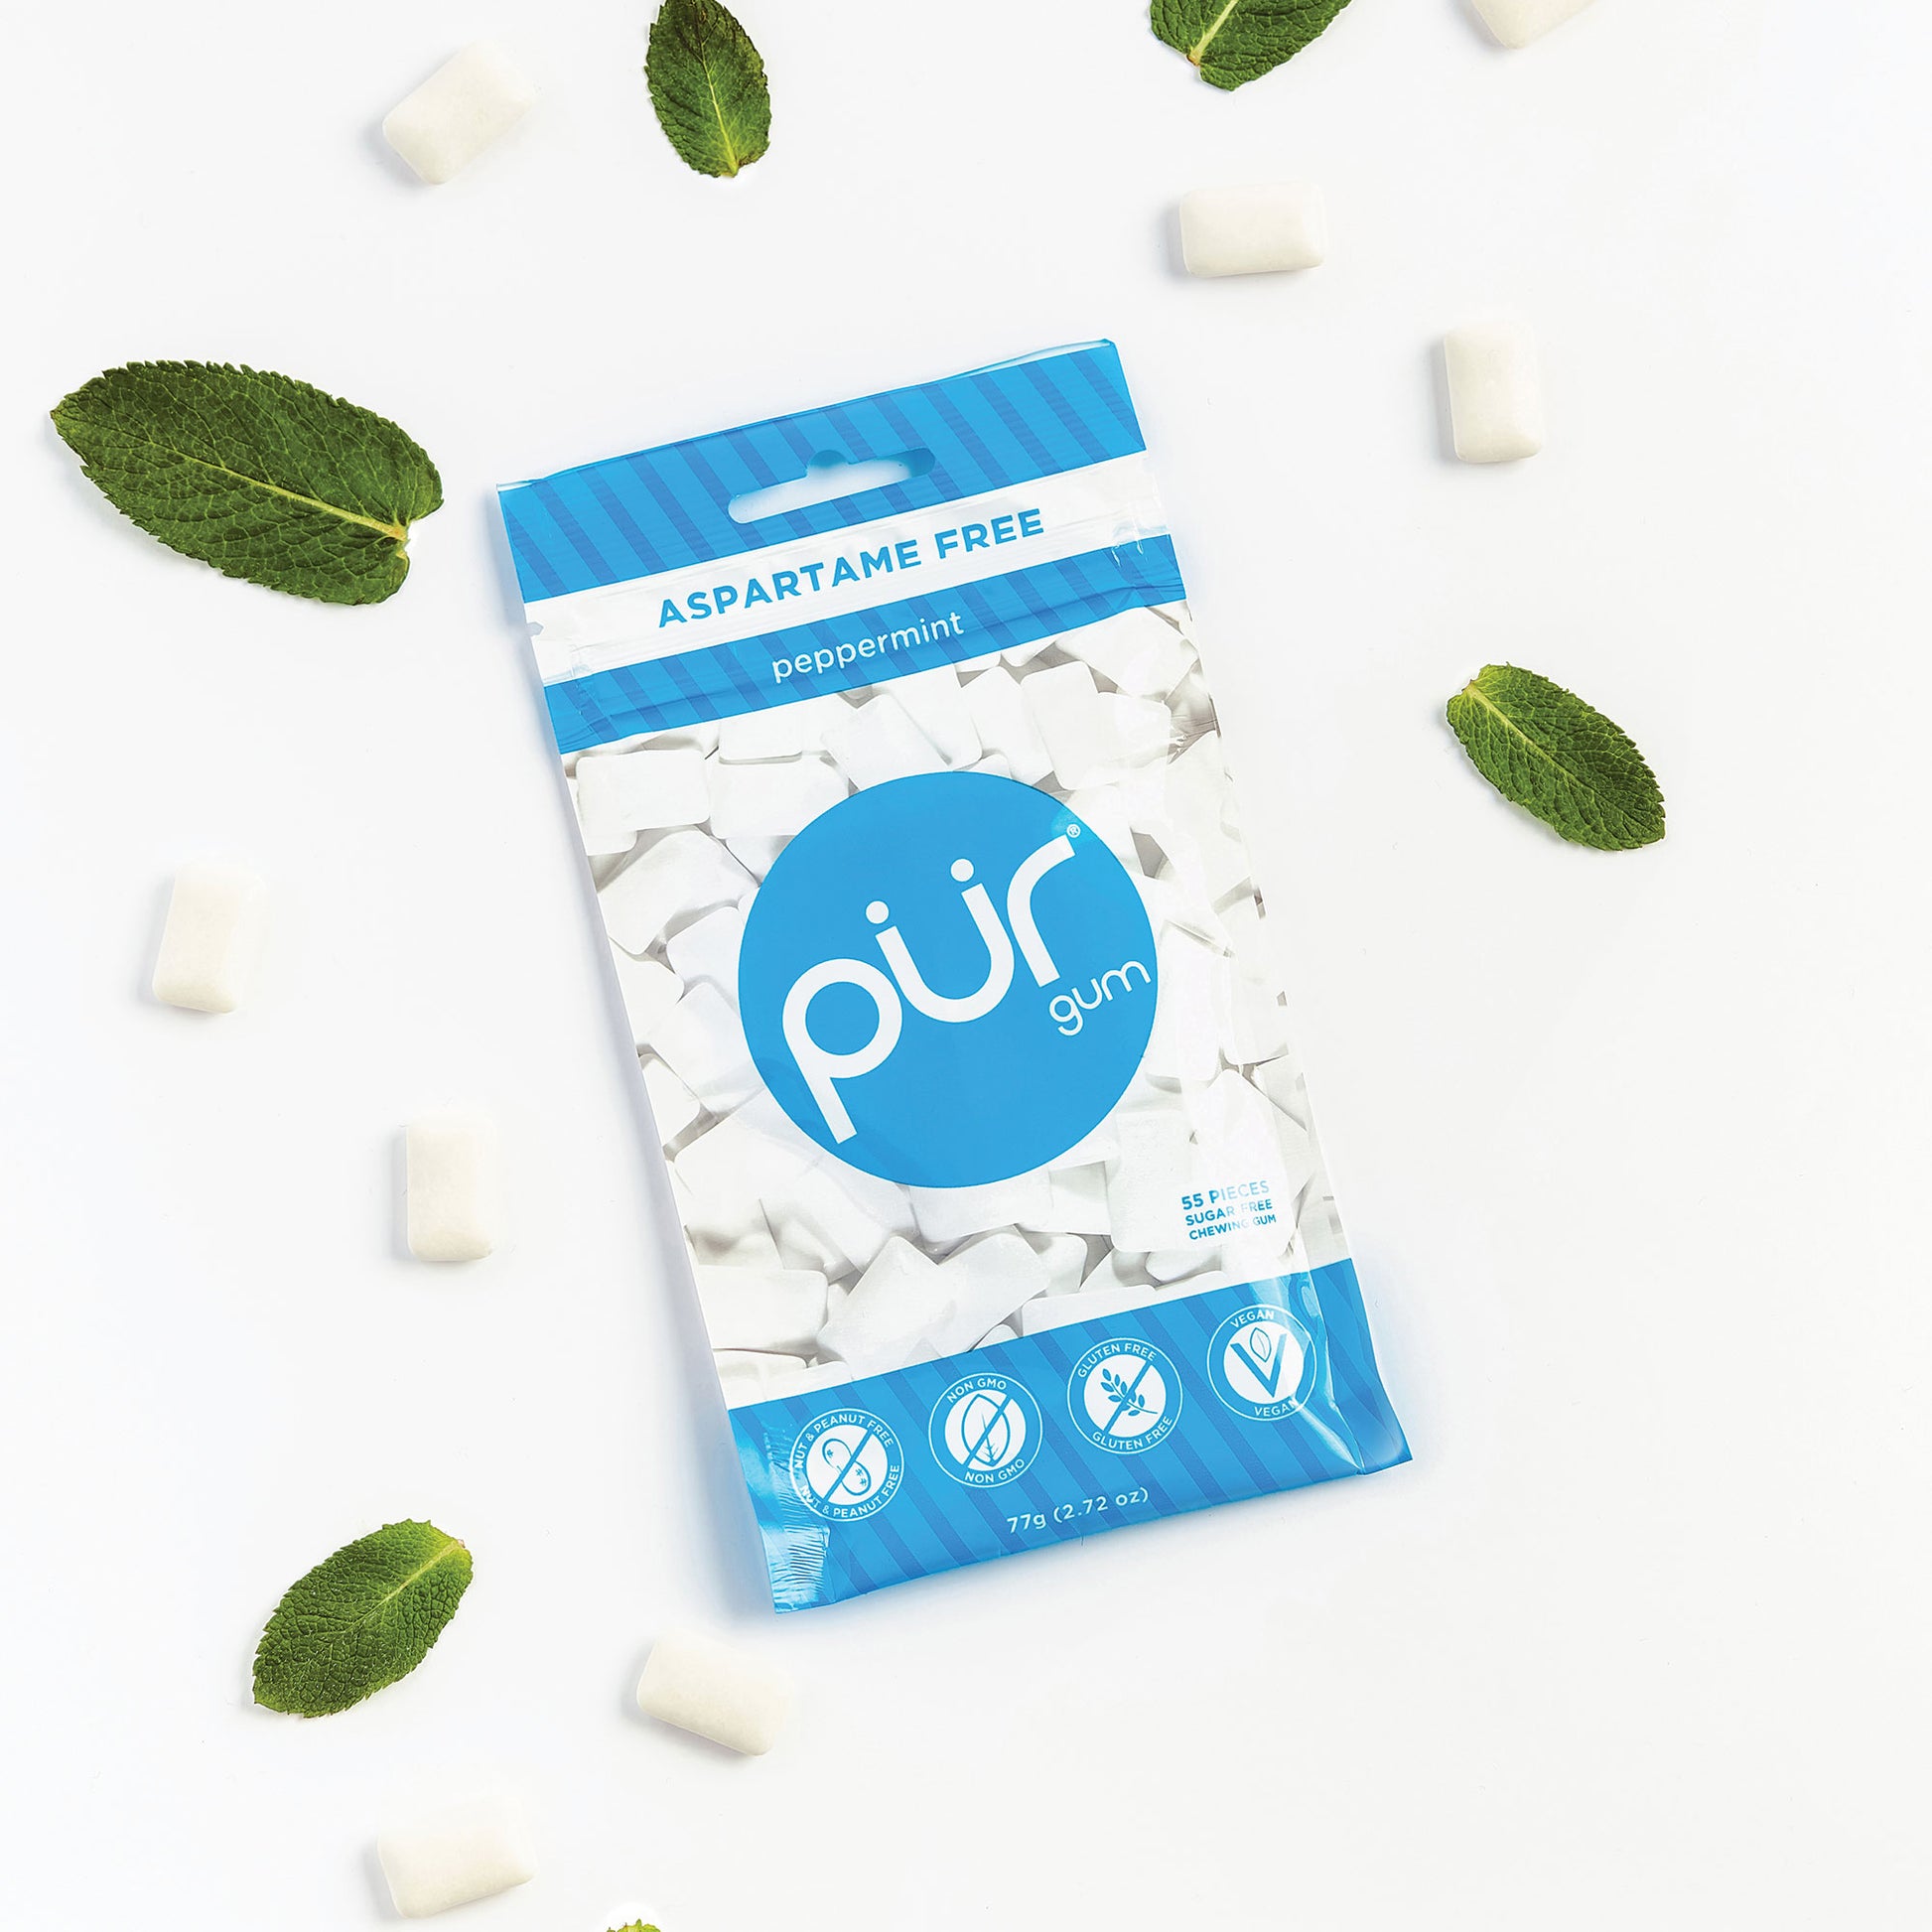 PUR Gum: Xylitol Sweetened - Candy Blog